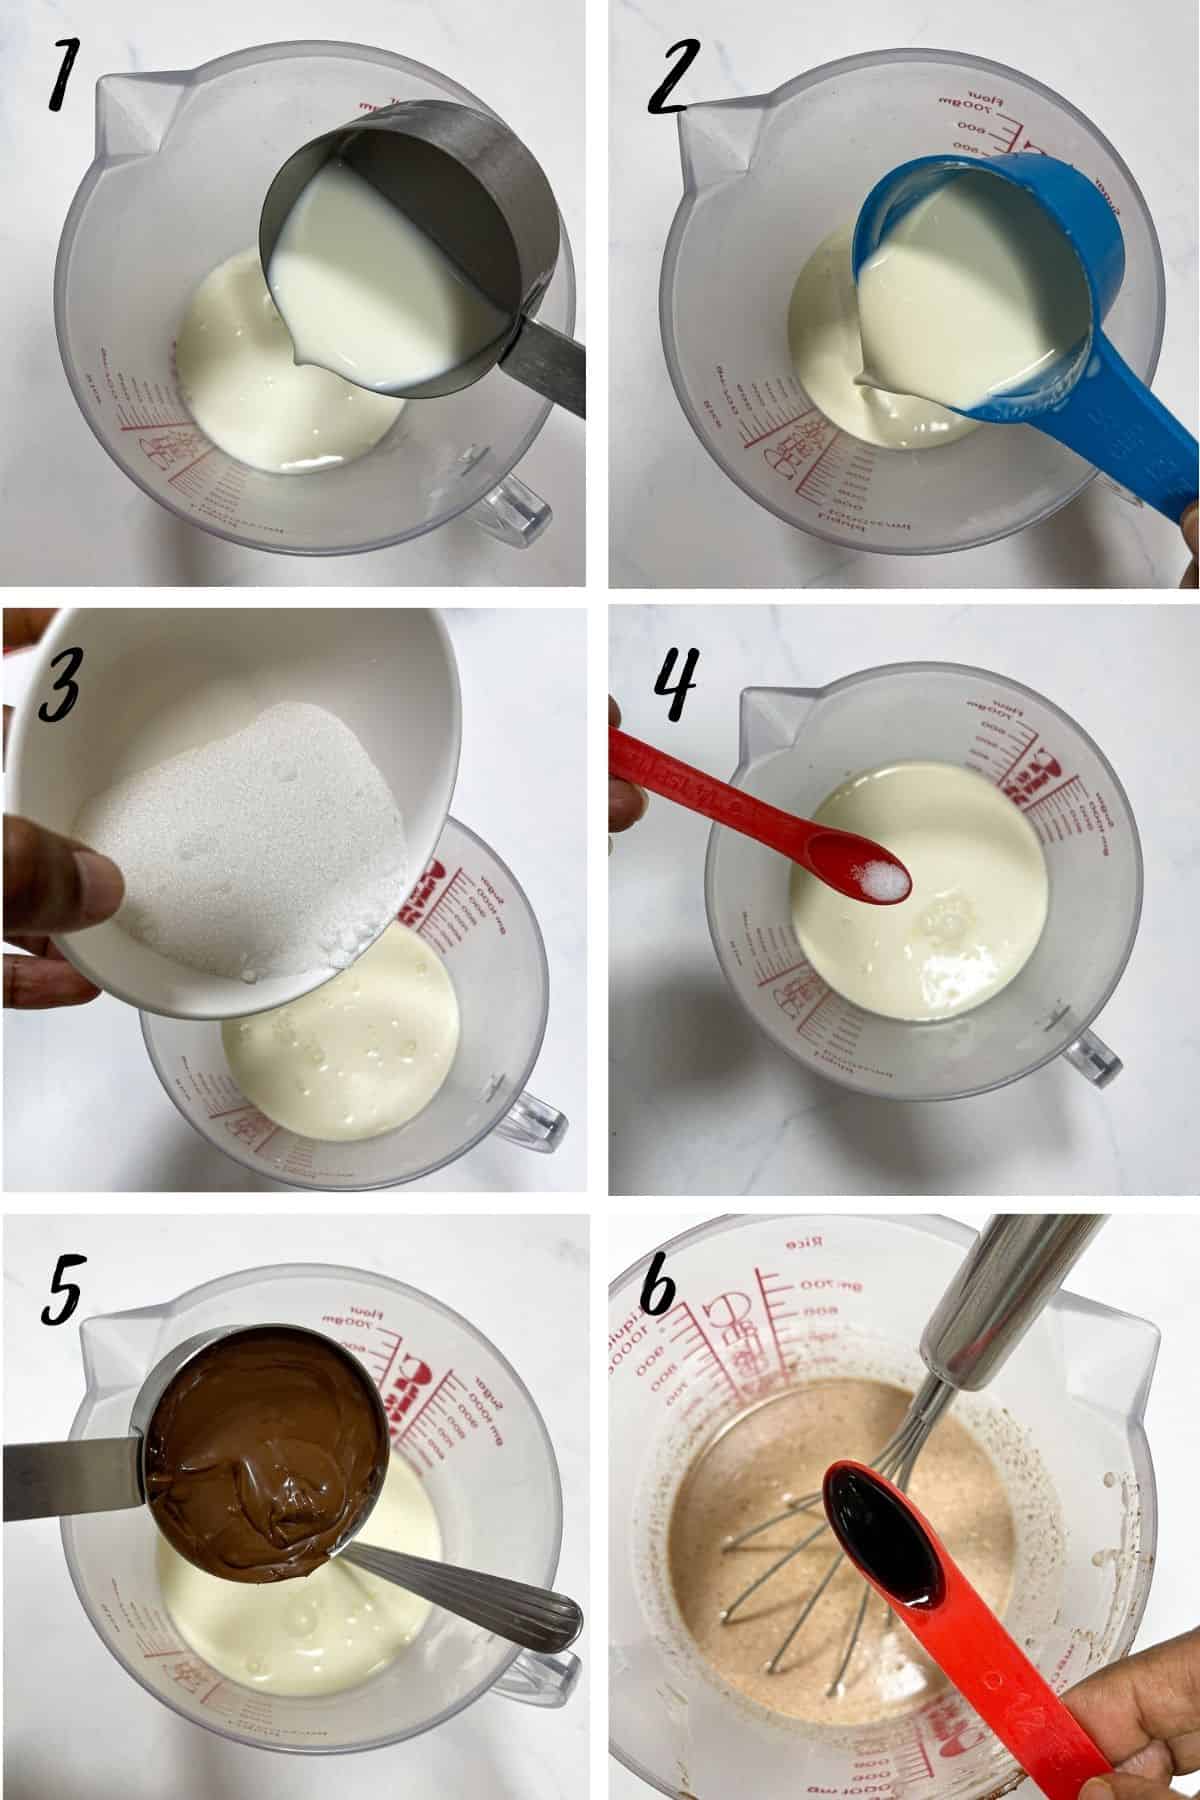 A poster of 6 images showing how to mix Kinder Bueno ice cream solution